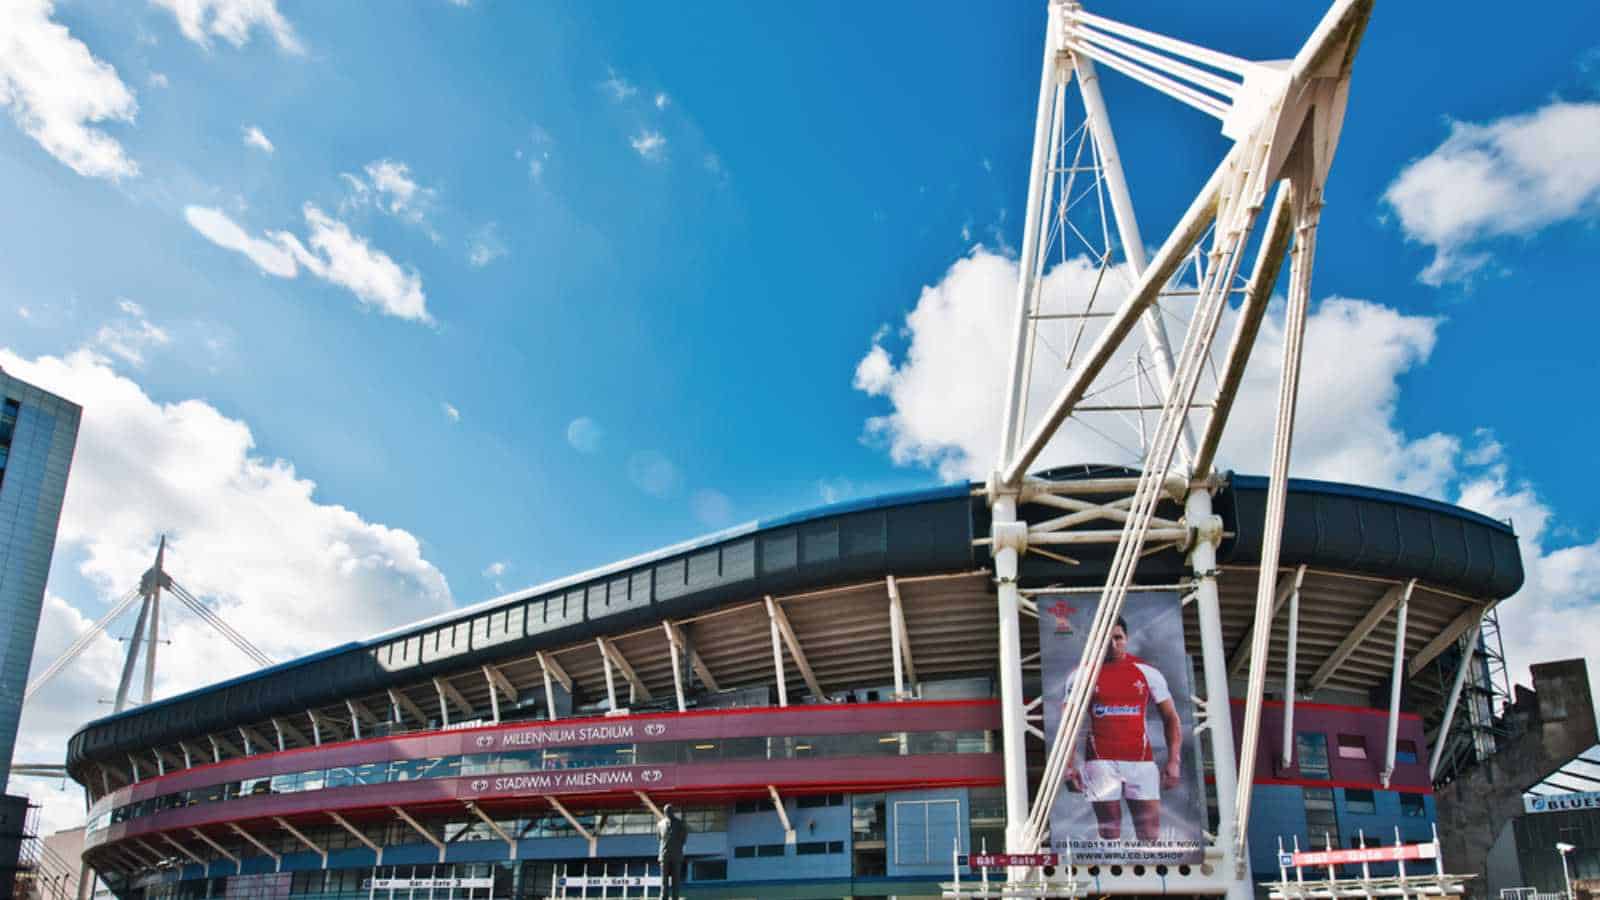 CARDIFF, UK - SEP 9: The Millennium Stadium, national stadium of Wales on September 9, 2010. The Engage Super League rugby season opens there, with Millennium Magic weekend on February 12th & 13th.